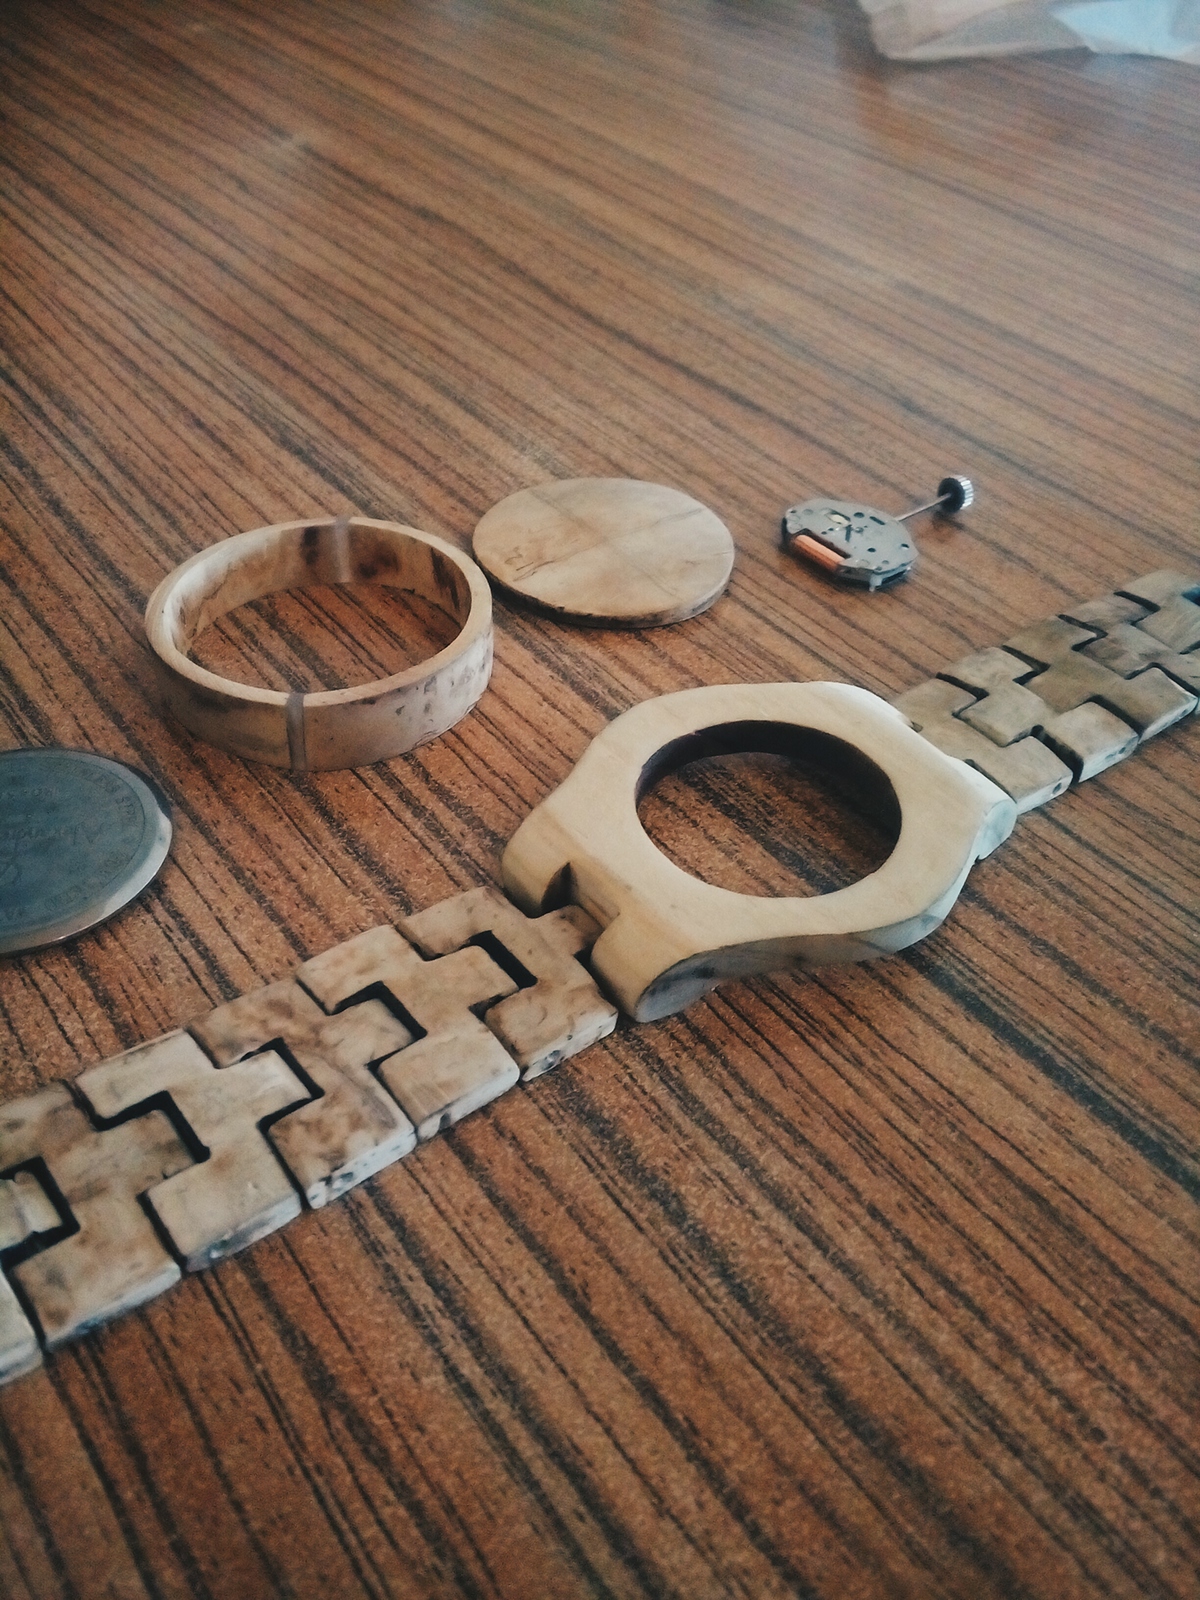 Watches product design  Coconut design product bandung wood jam WoodenWatch